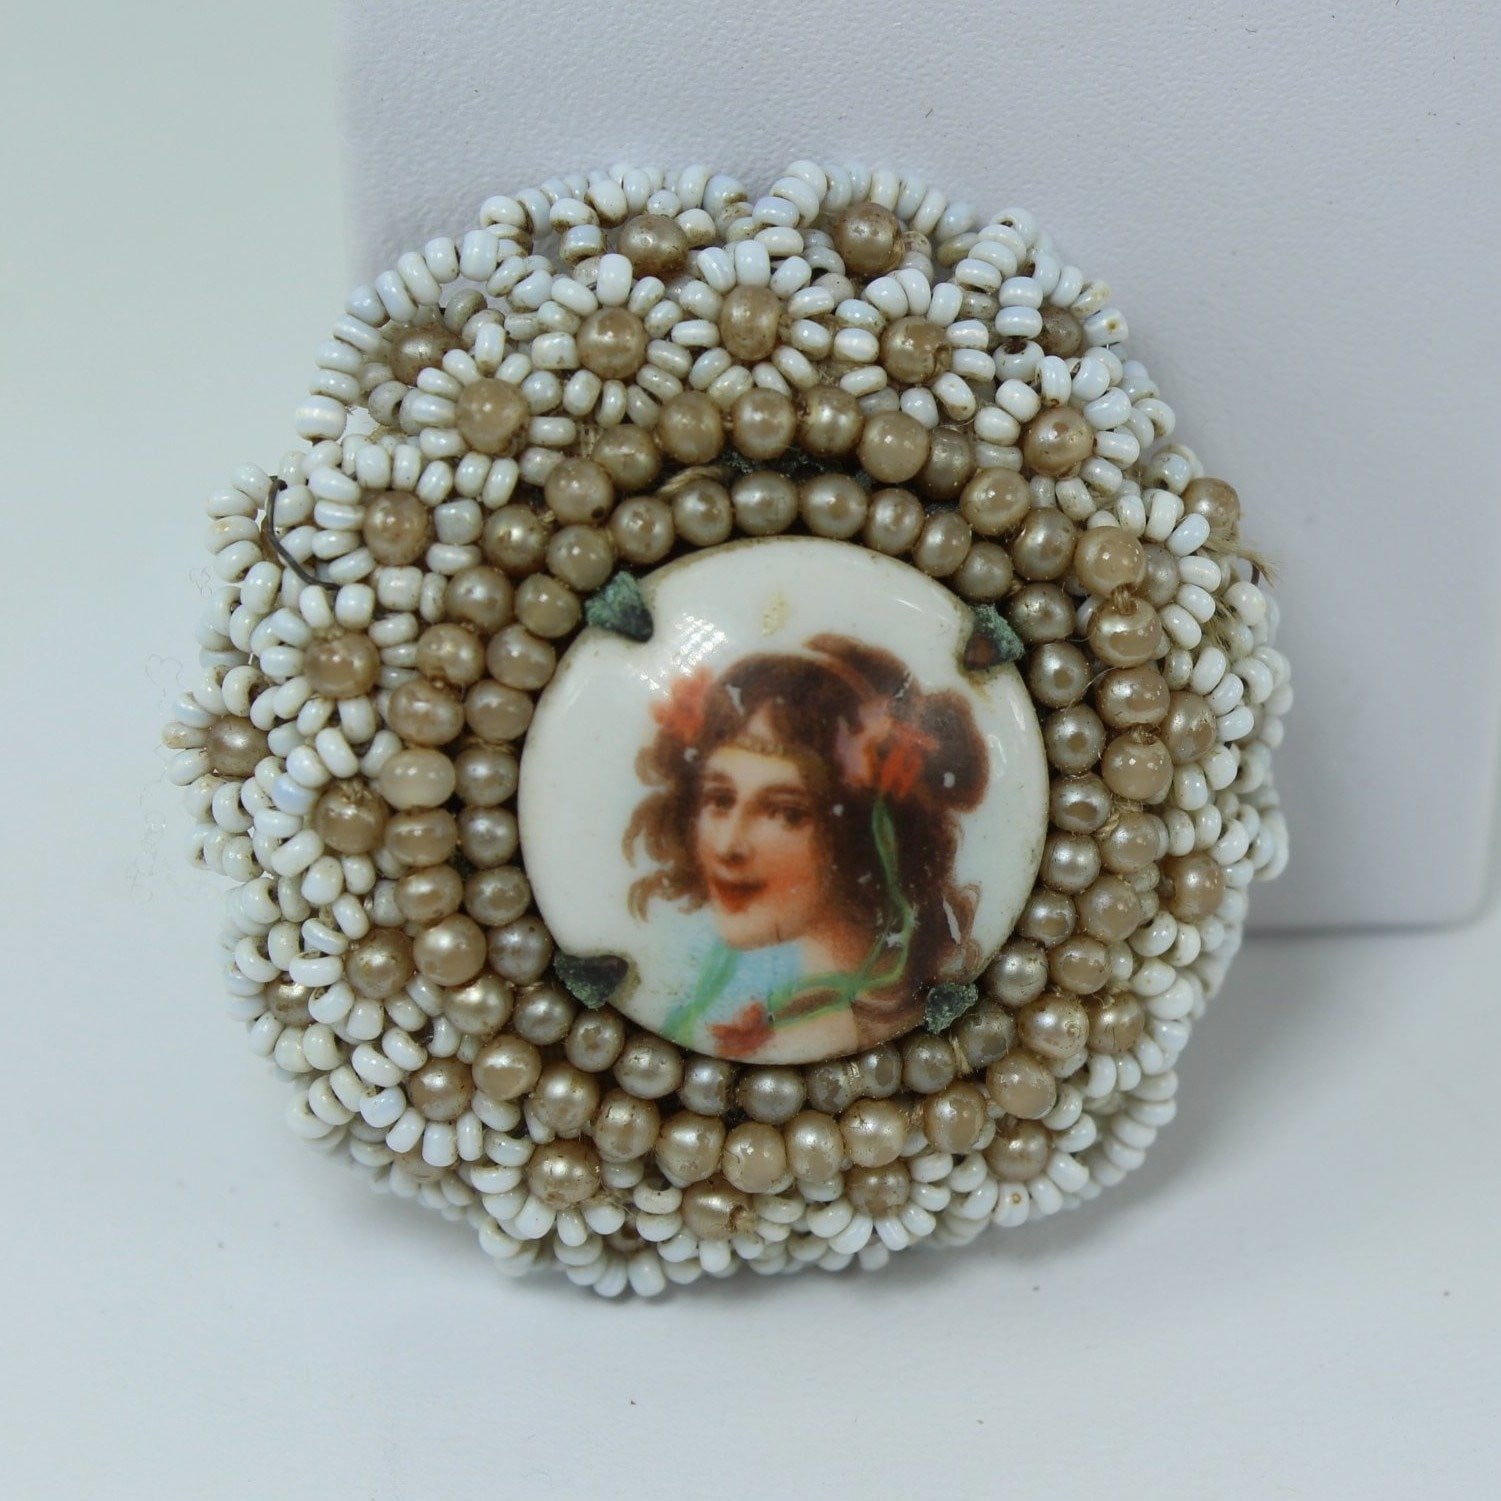 Woman Porcelain Pin Brooch Vintage Antique Glass Seed Bead Pearl Frame